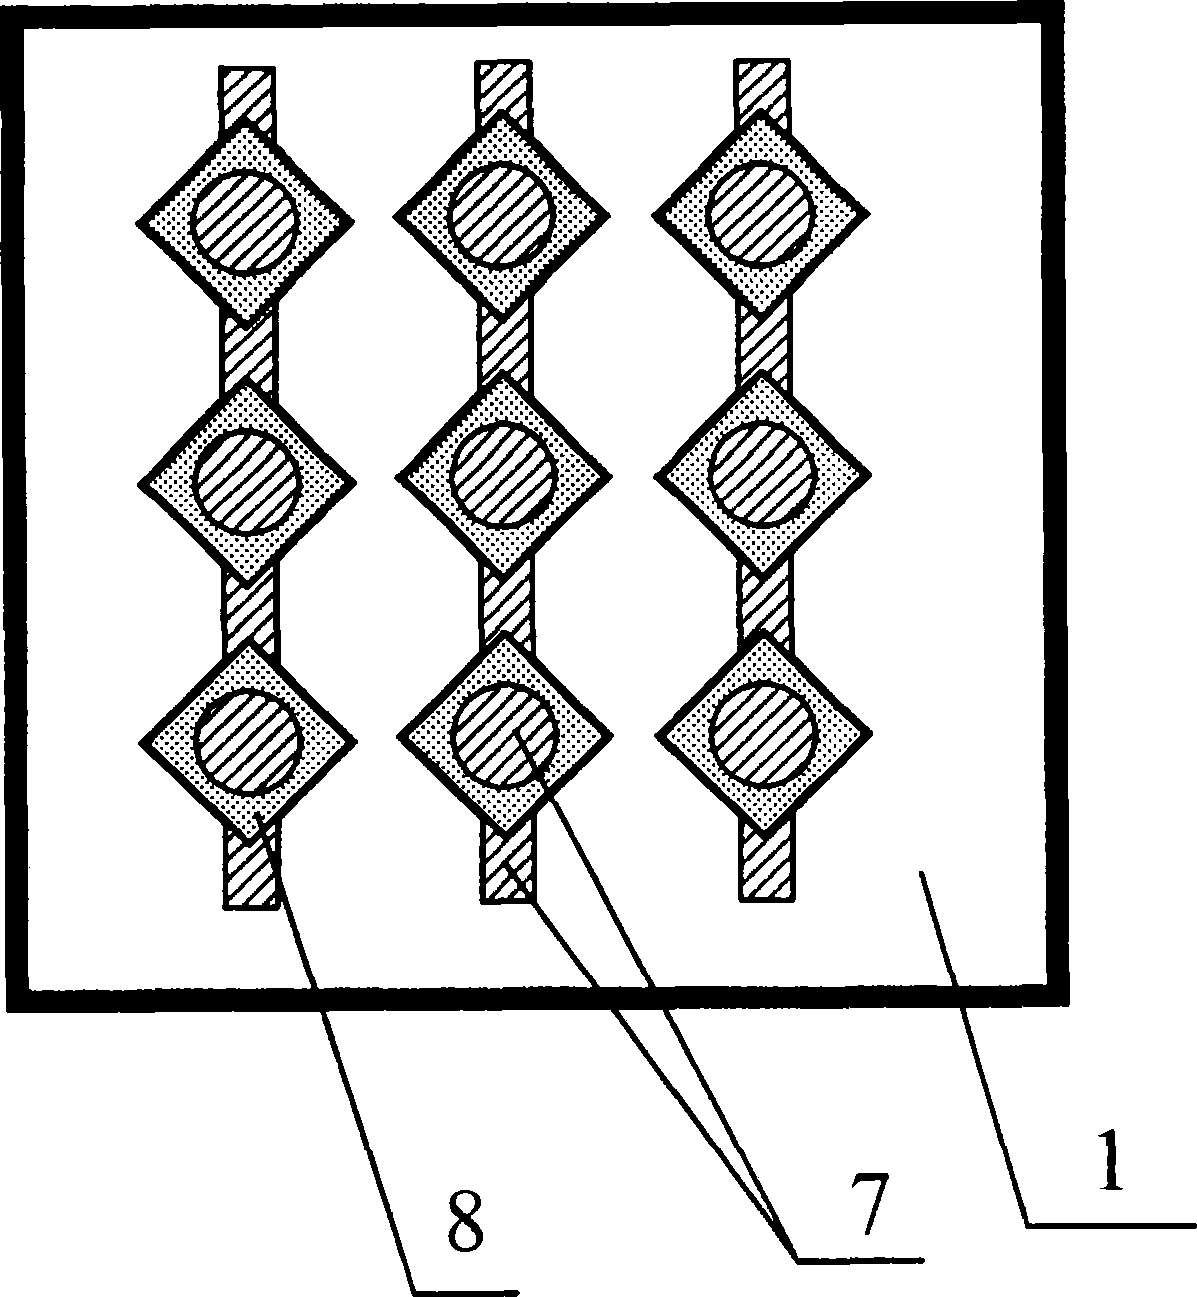 Flat-board display of hollow bottom grid array structure and mfg. technology